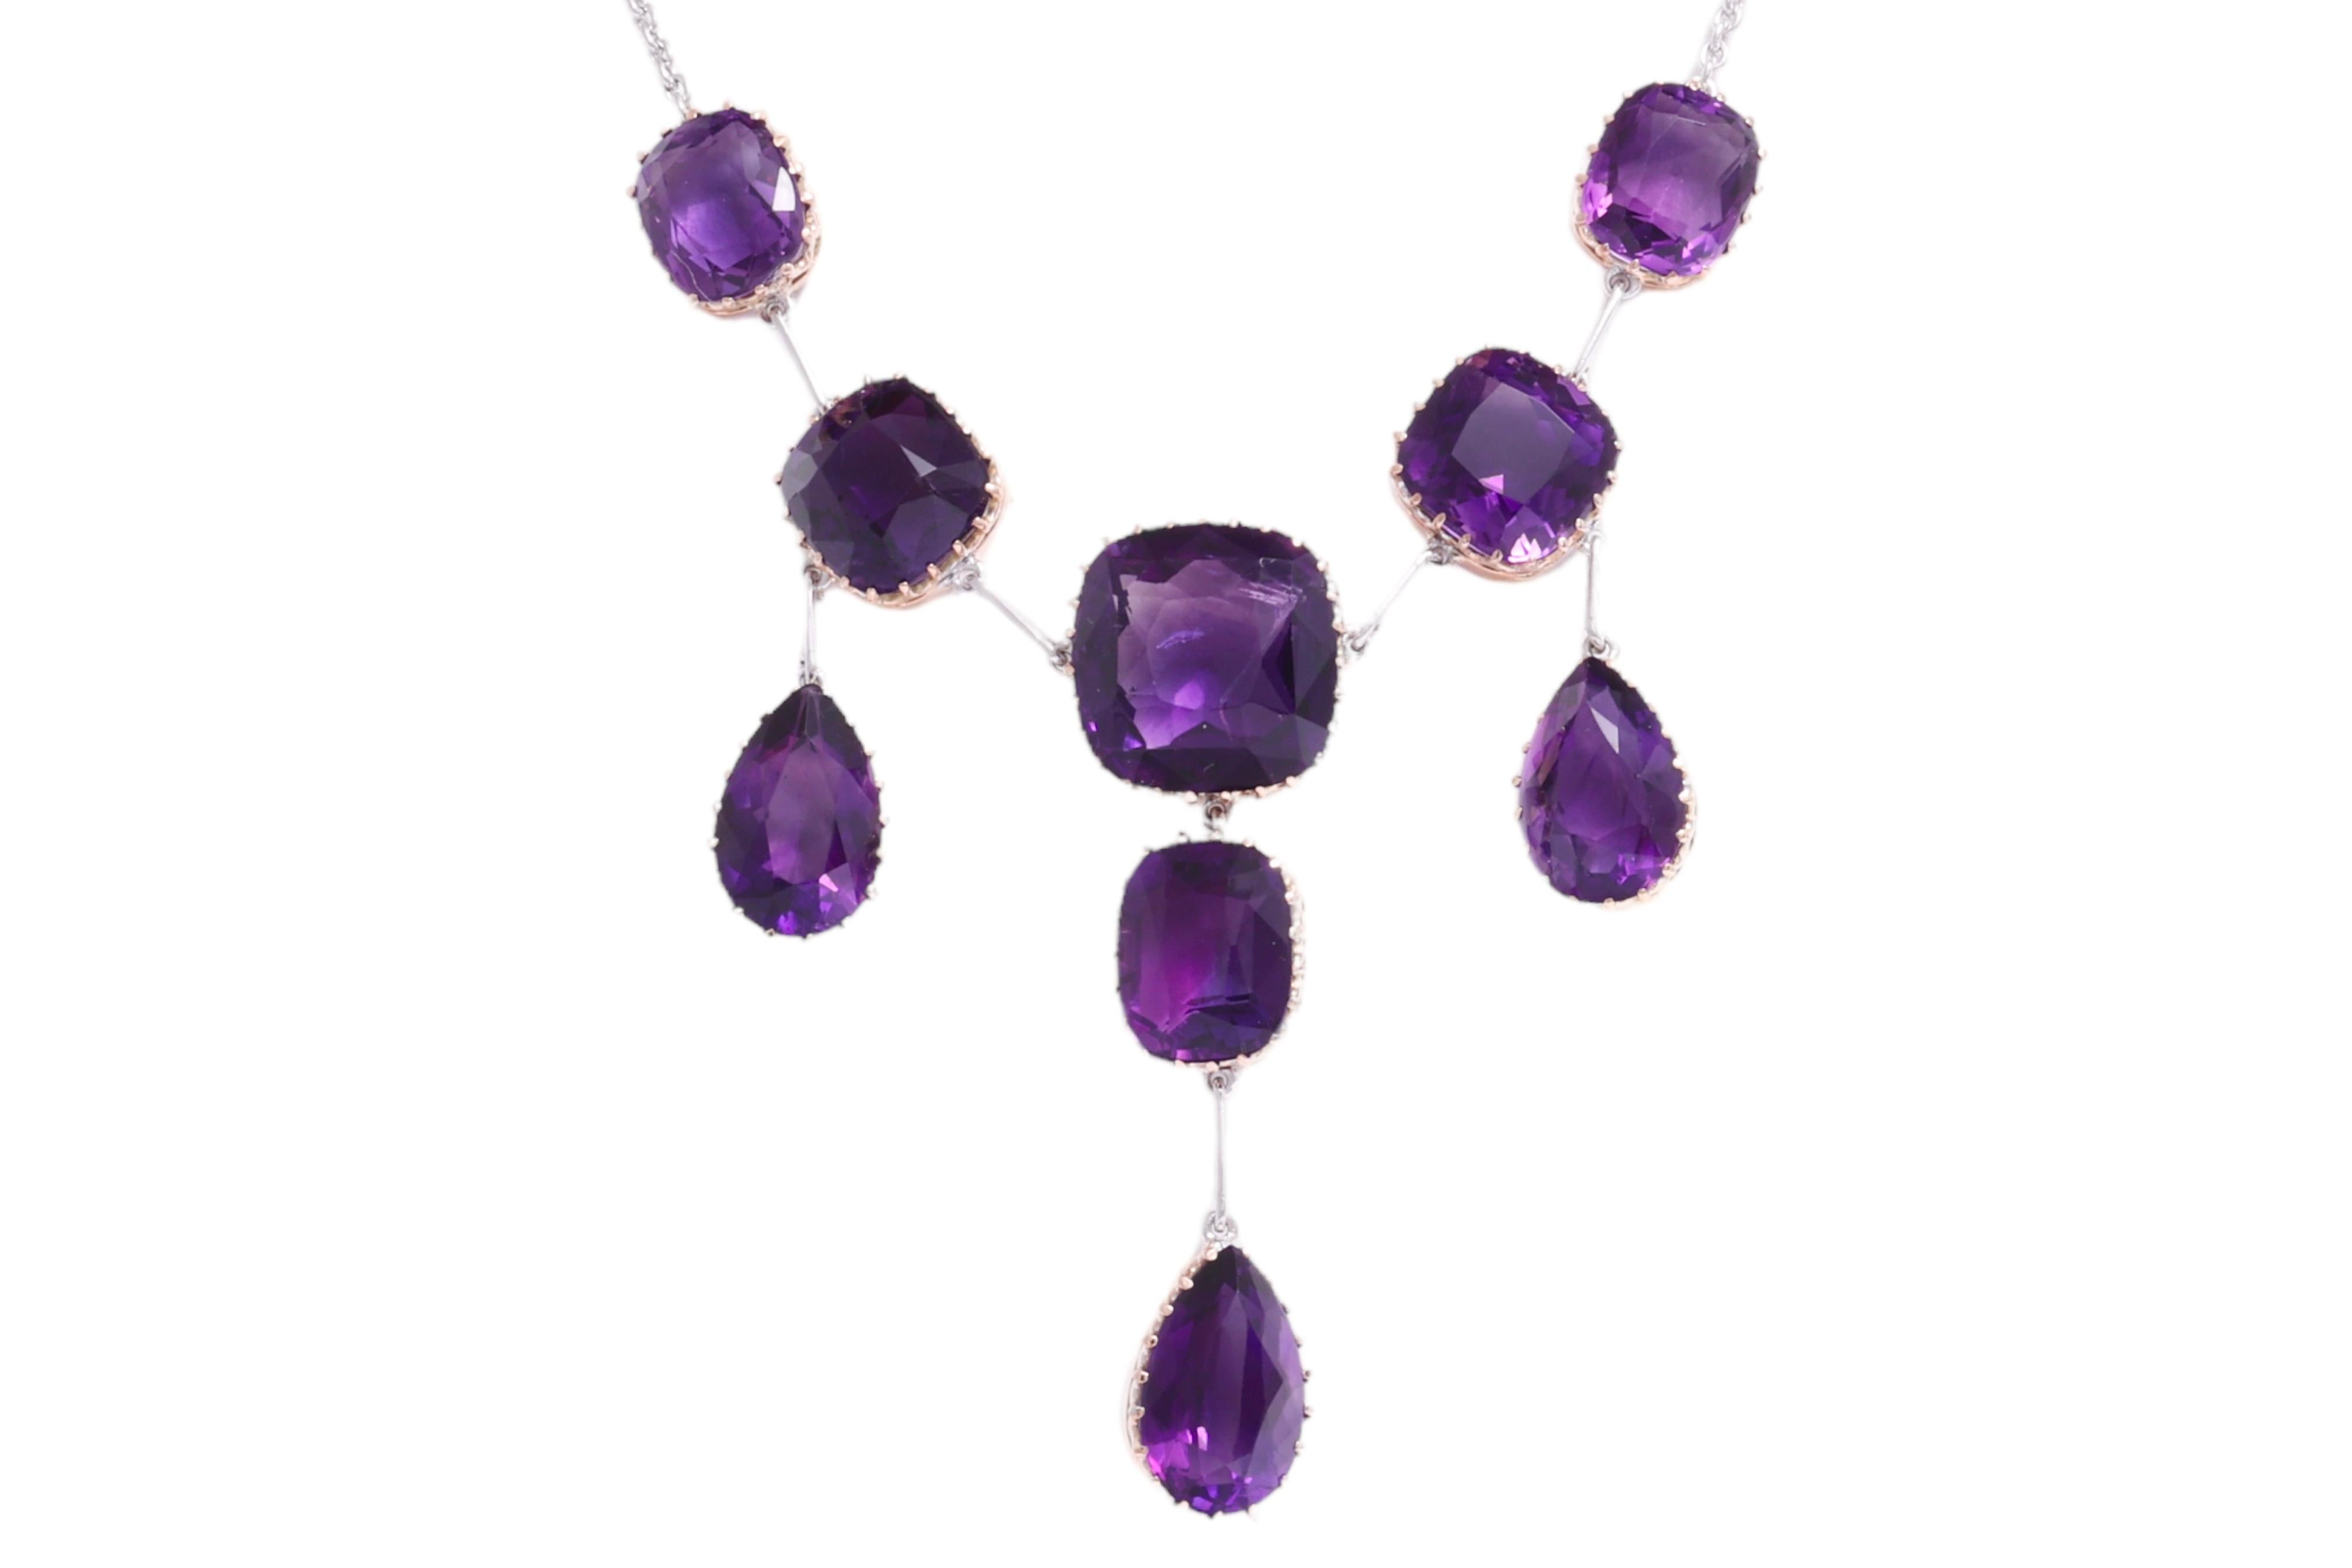 Artisan Gorgeous Platinum / Gold Chandelier Drop Necklace With 55 ct. Amethyst Gemstones For Sale